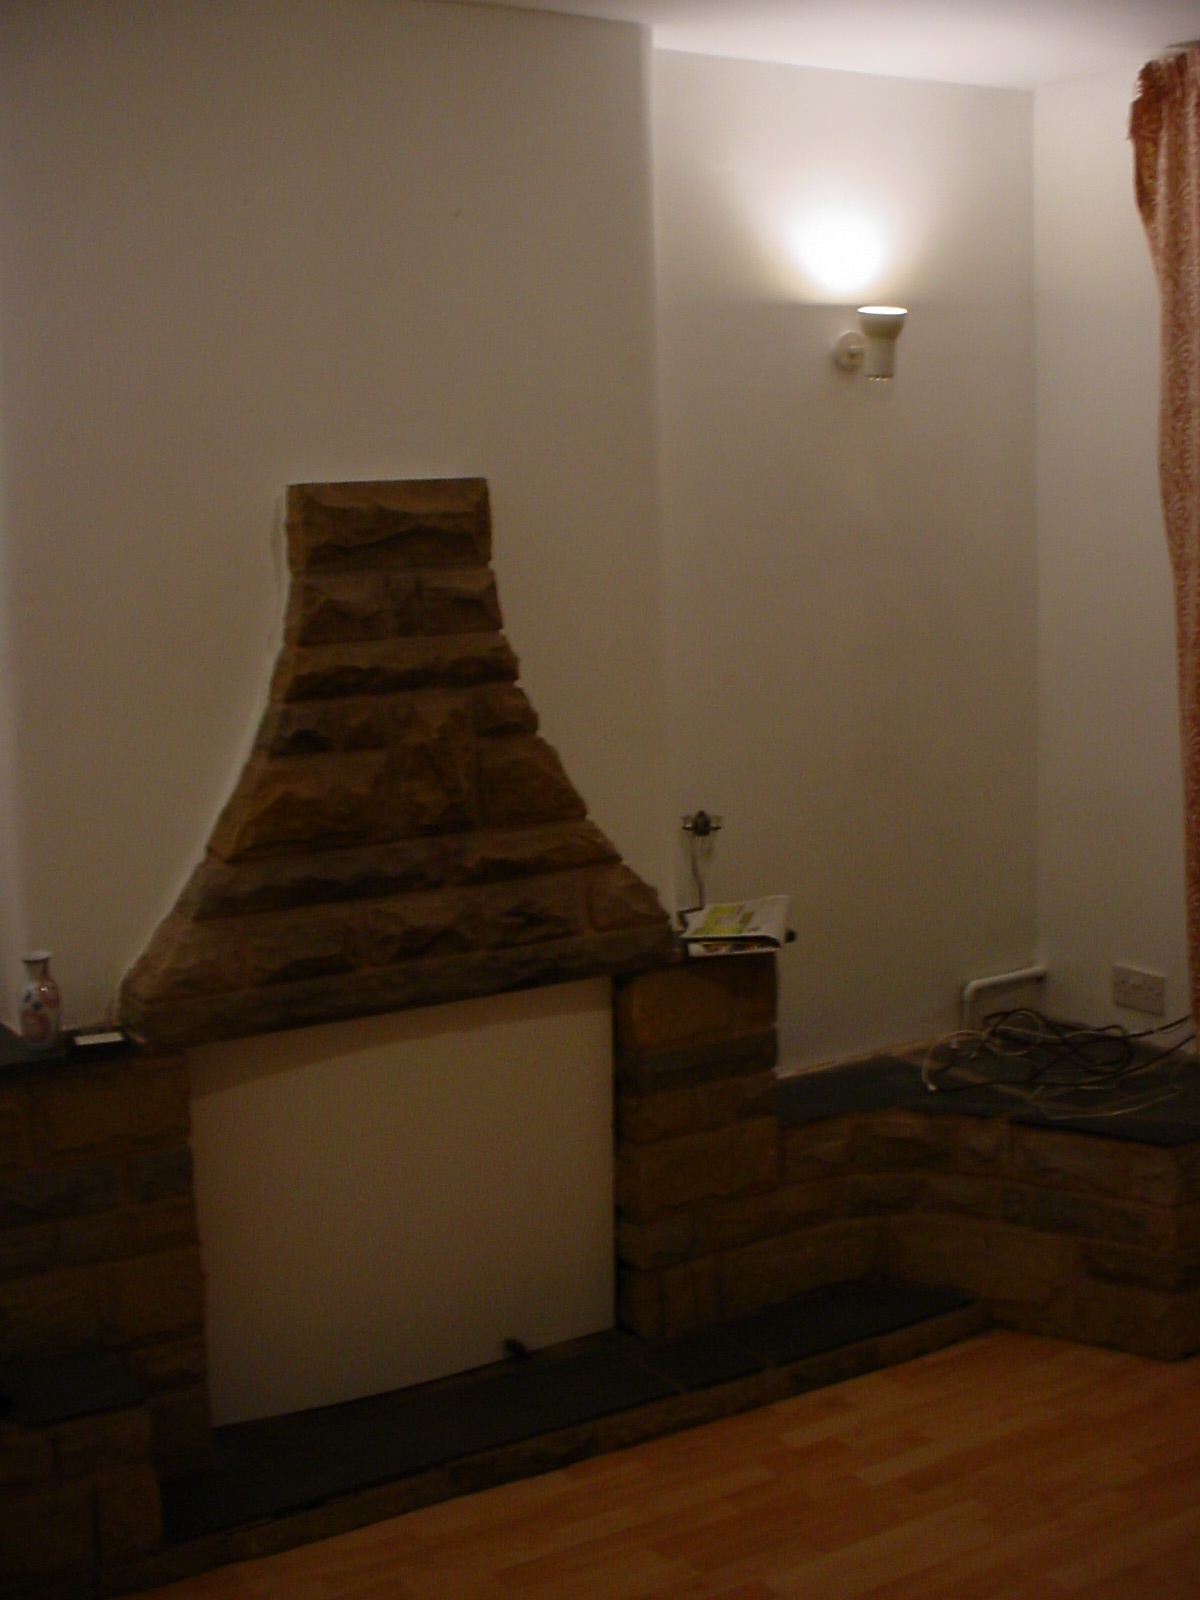 Stone built fireplace in the lounge